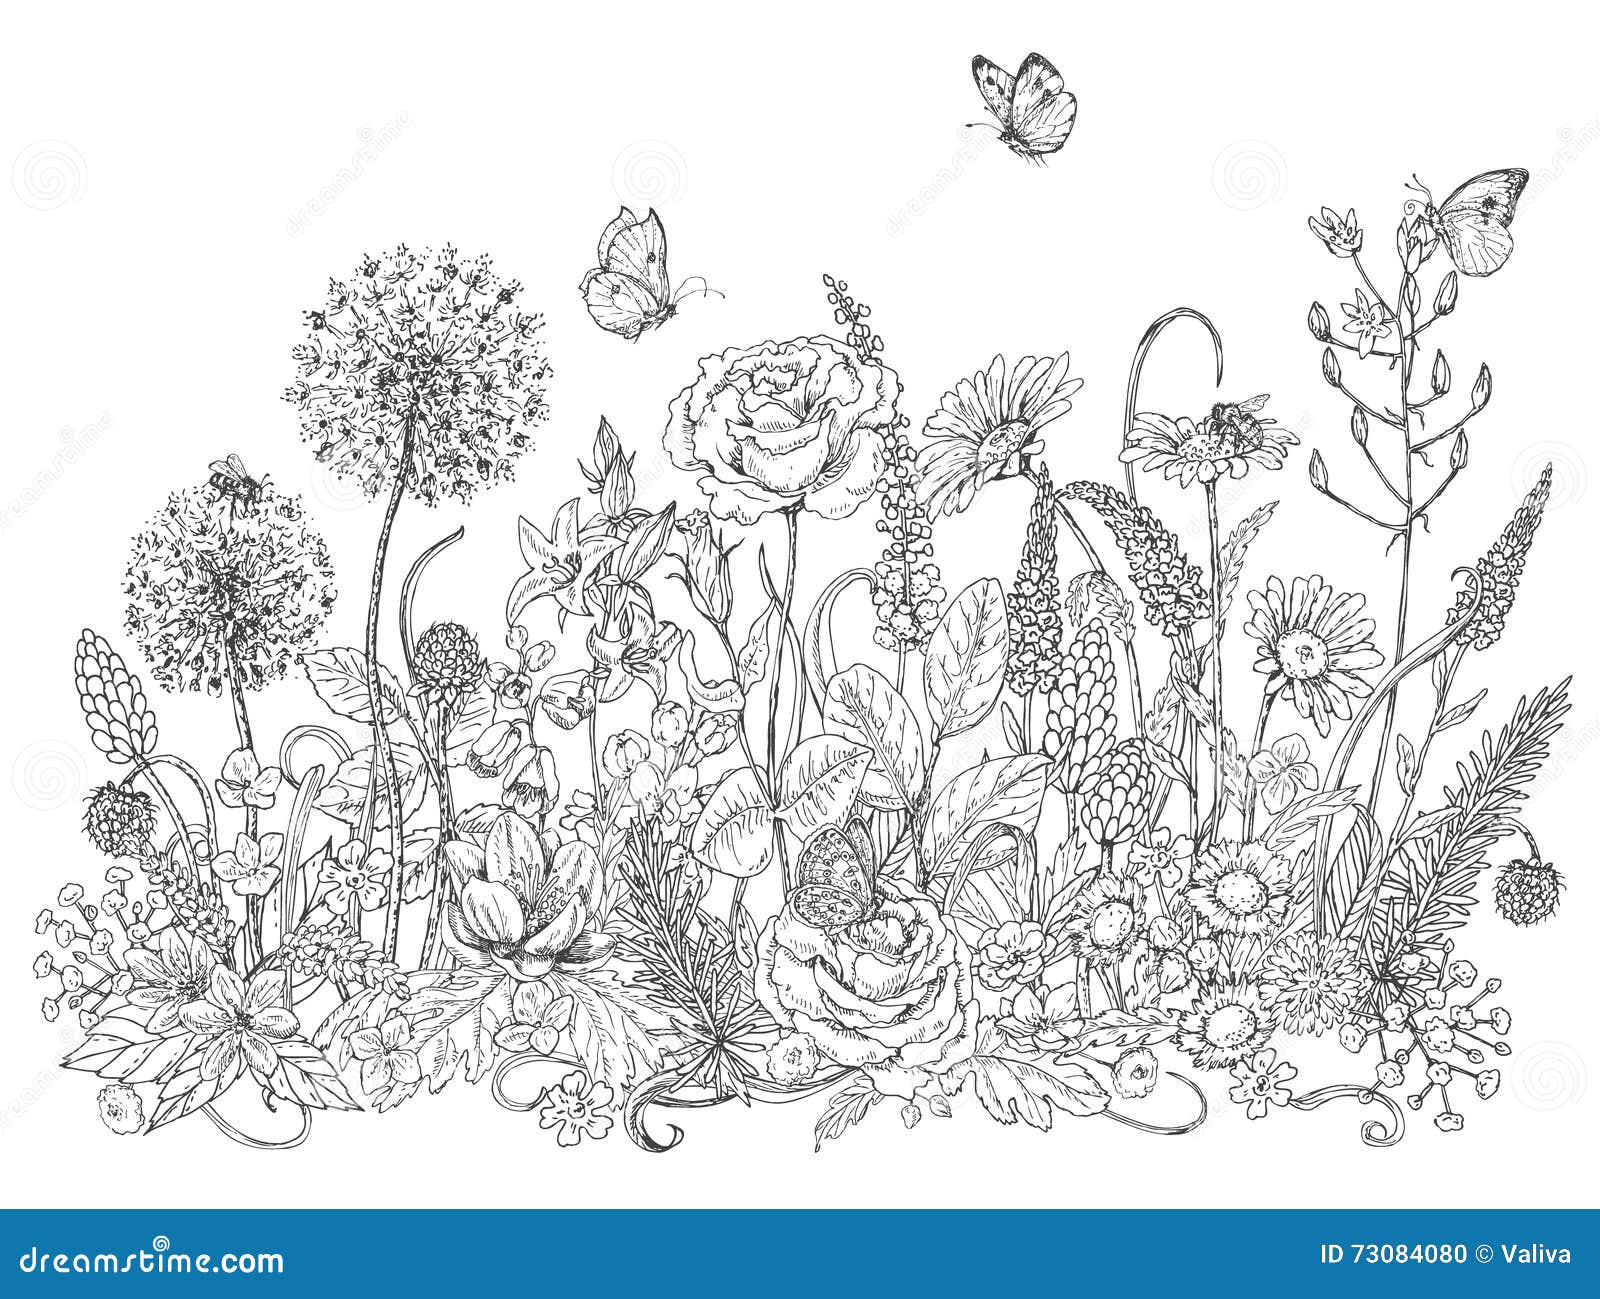 wildflowers and insects sketch